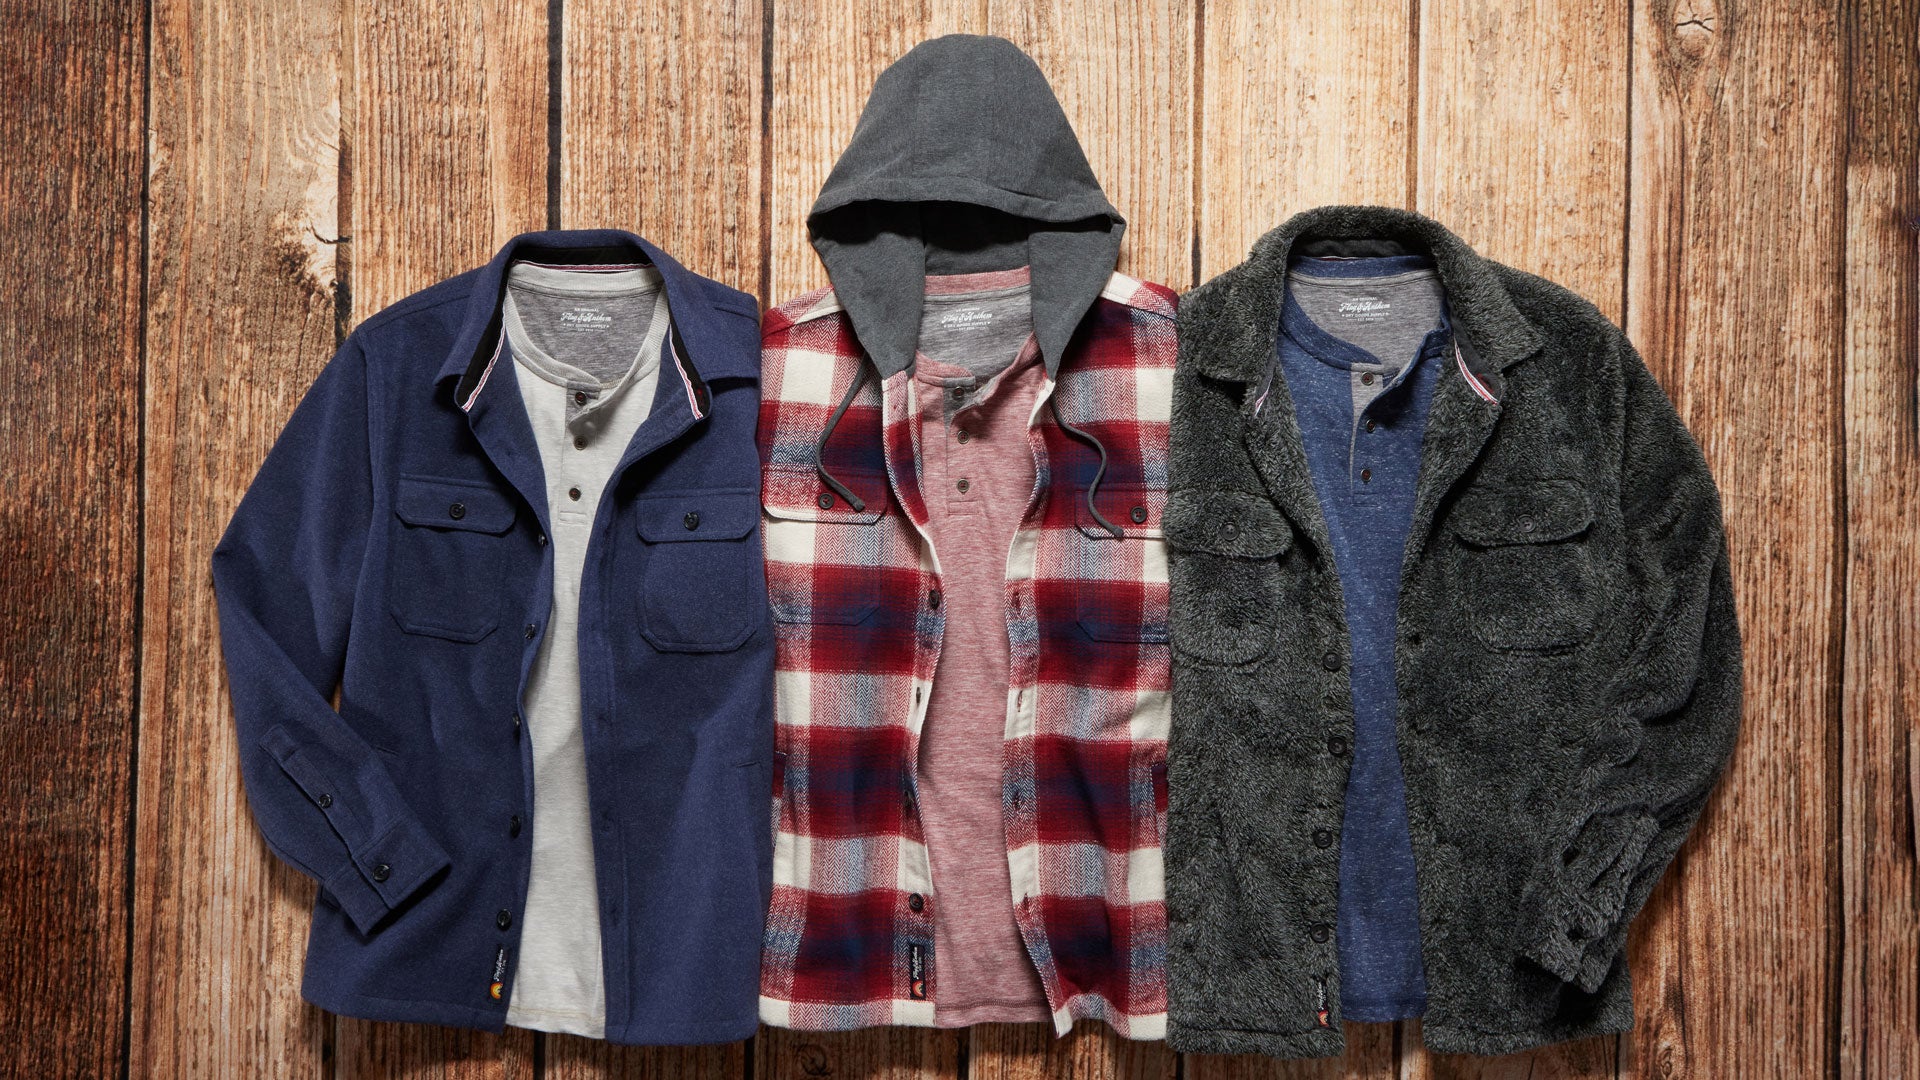 $49 Jackets & $39 Vests – Tagged 